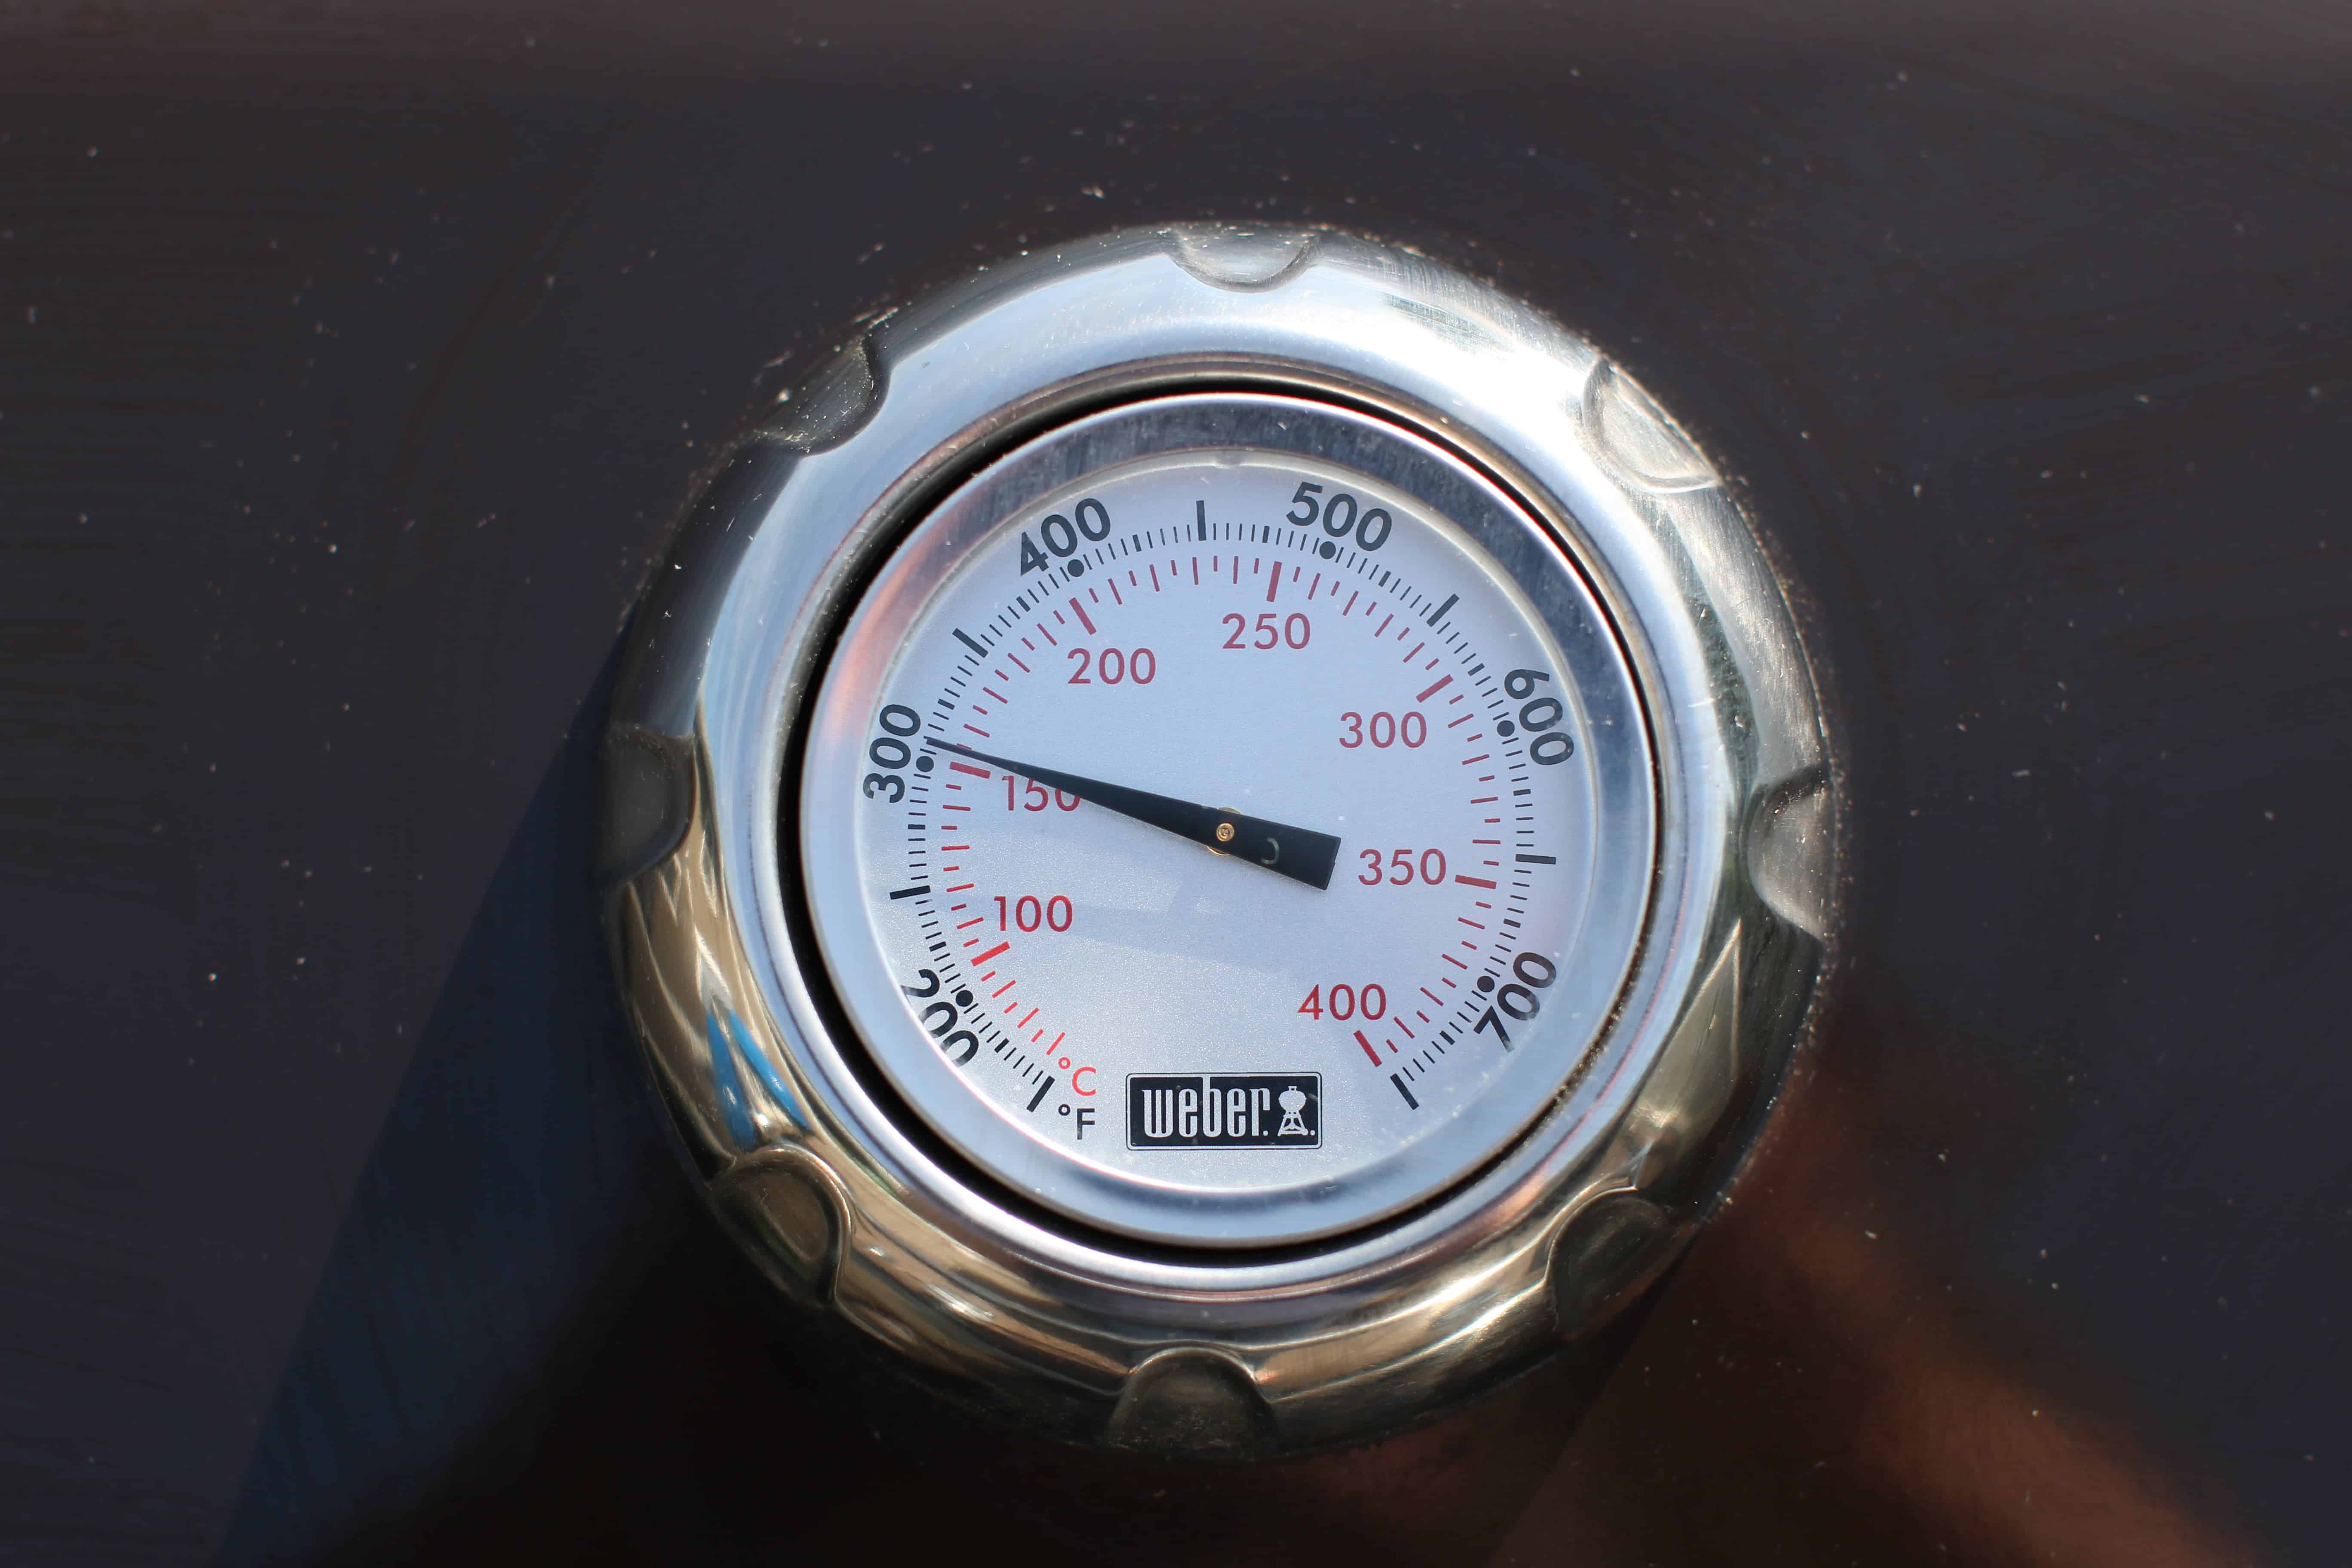 temperature gauge on grill showing 300 degrees Fahrenheit. 